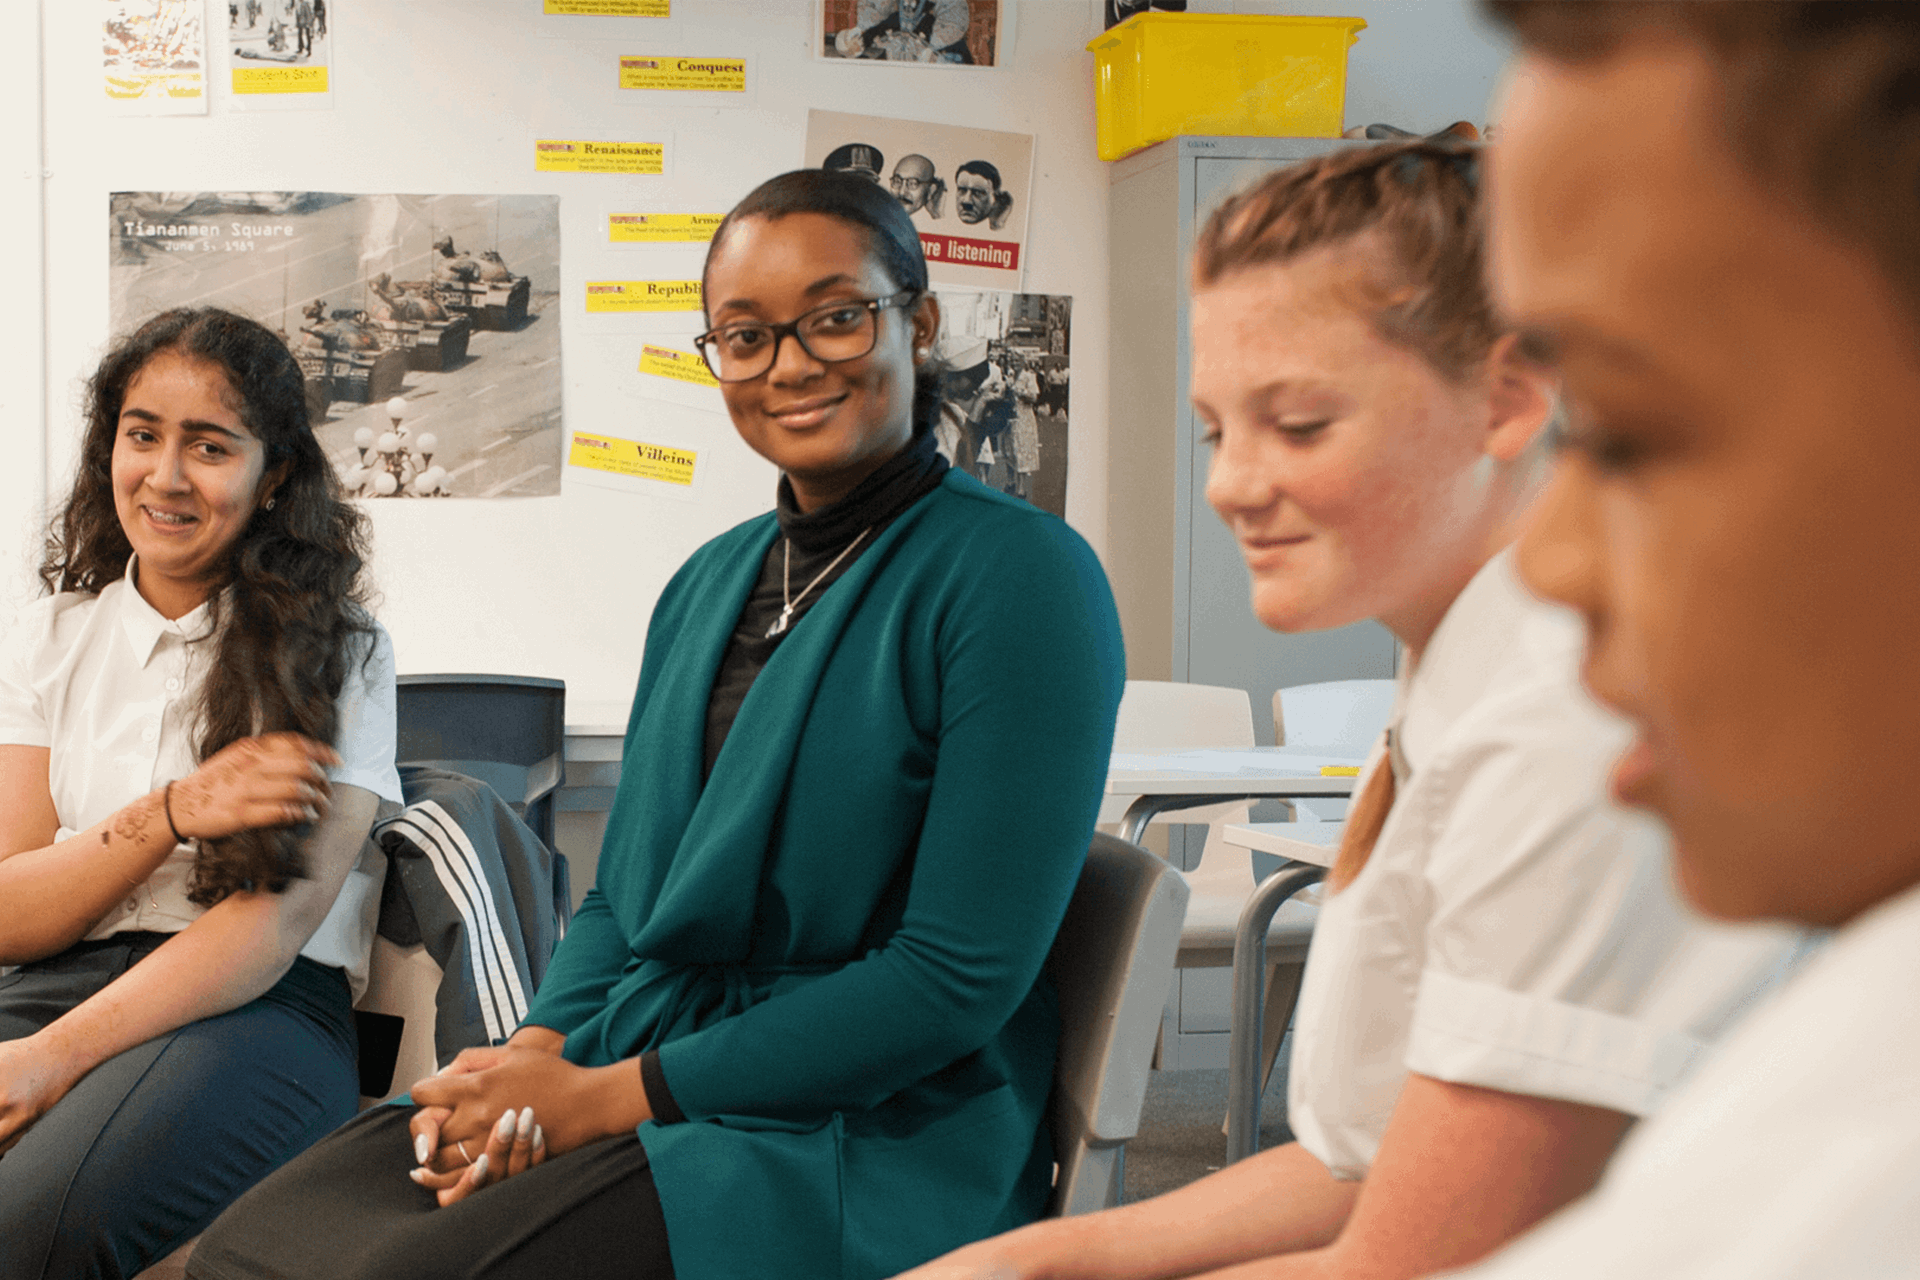 teacher-sitting-with-three-students-in-classroom-smiling